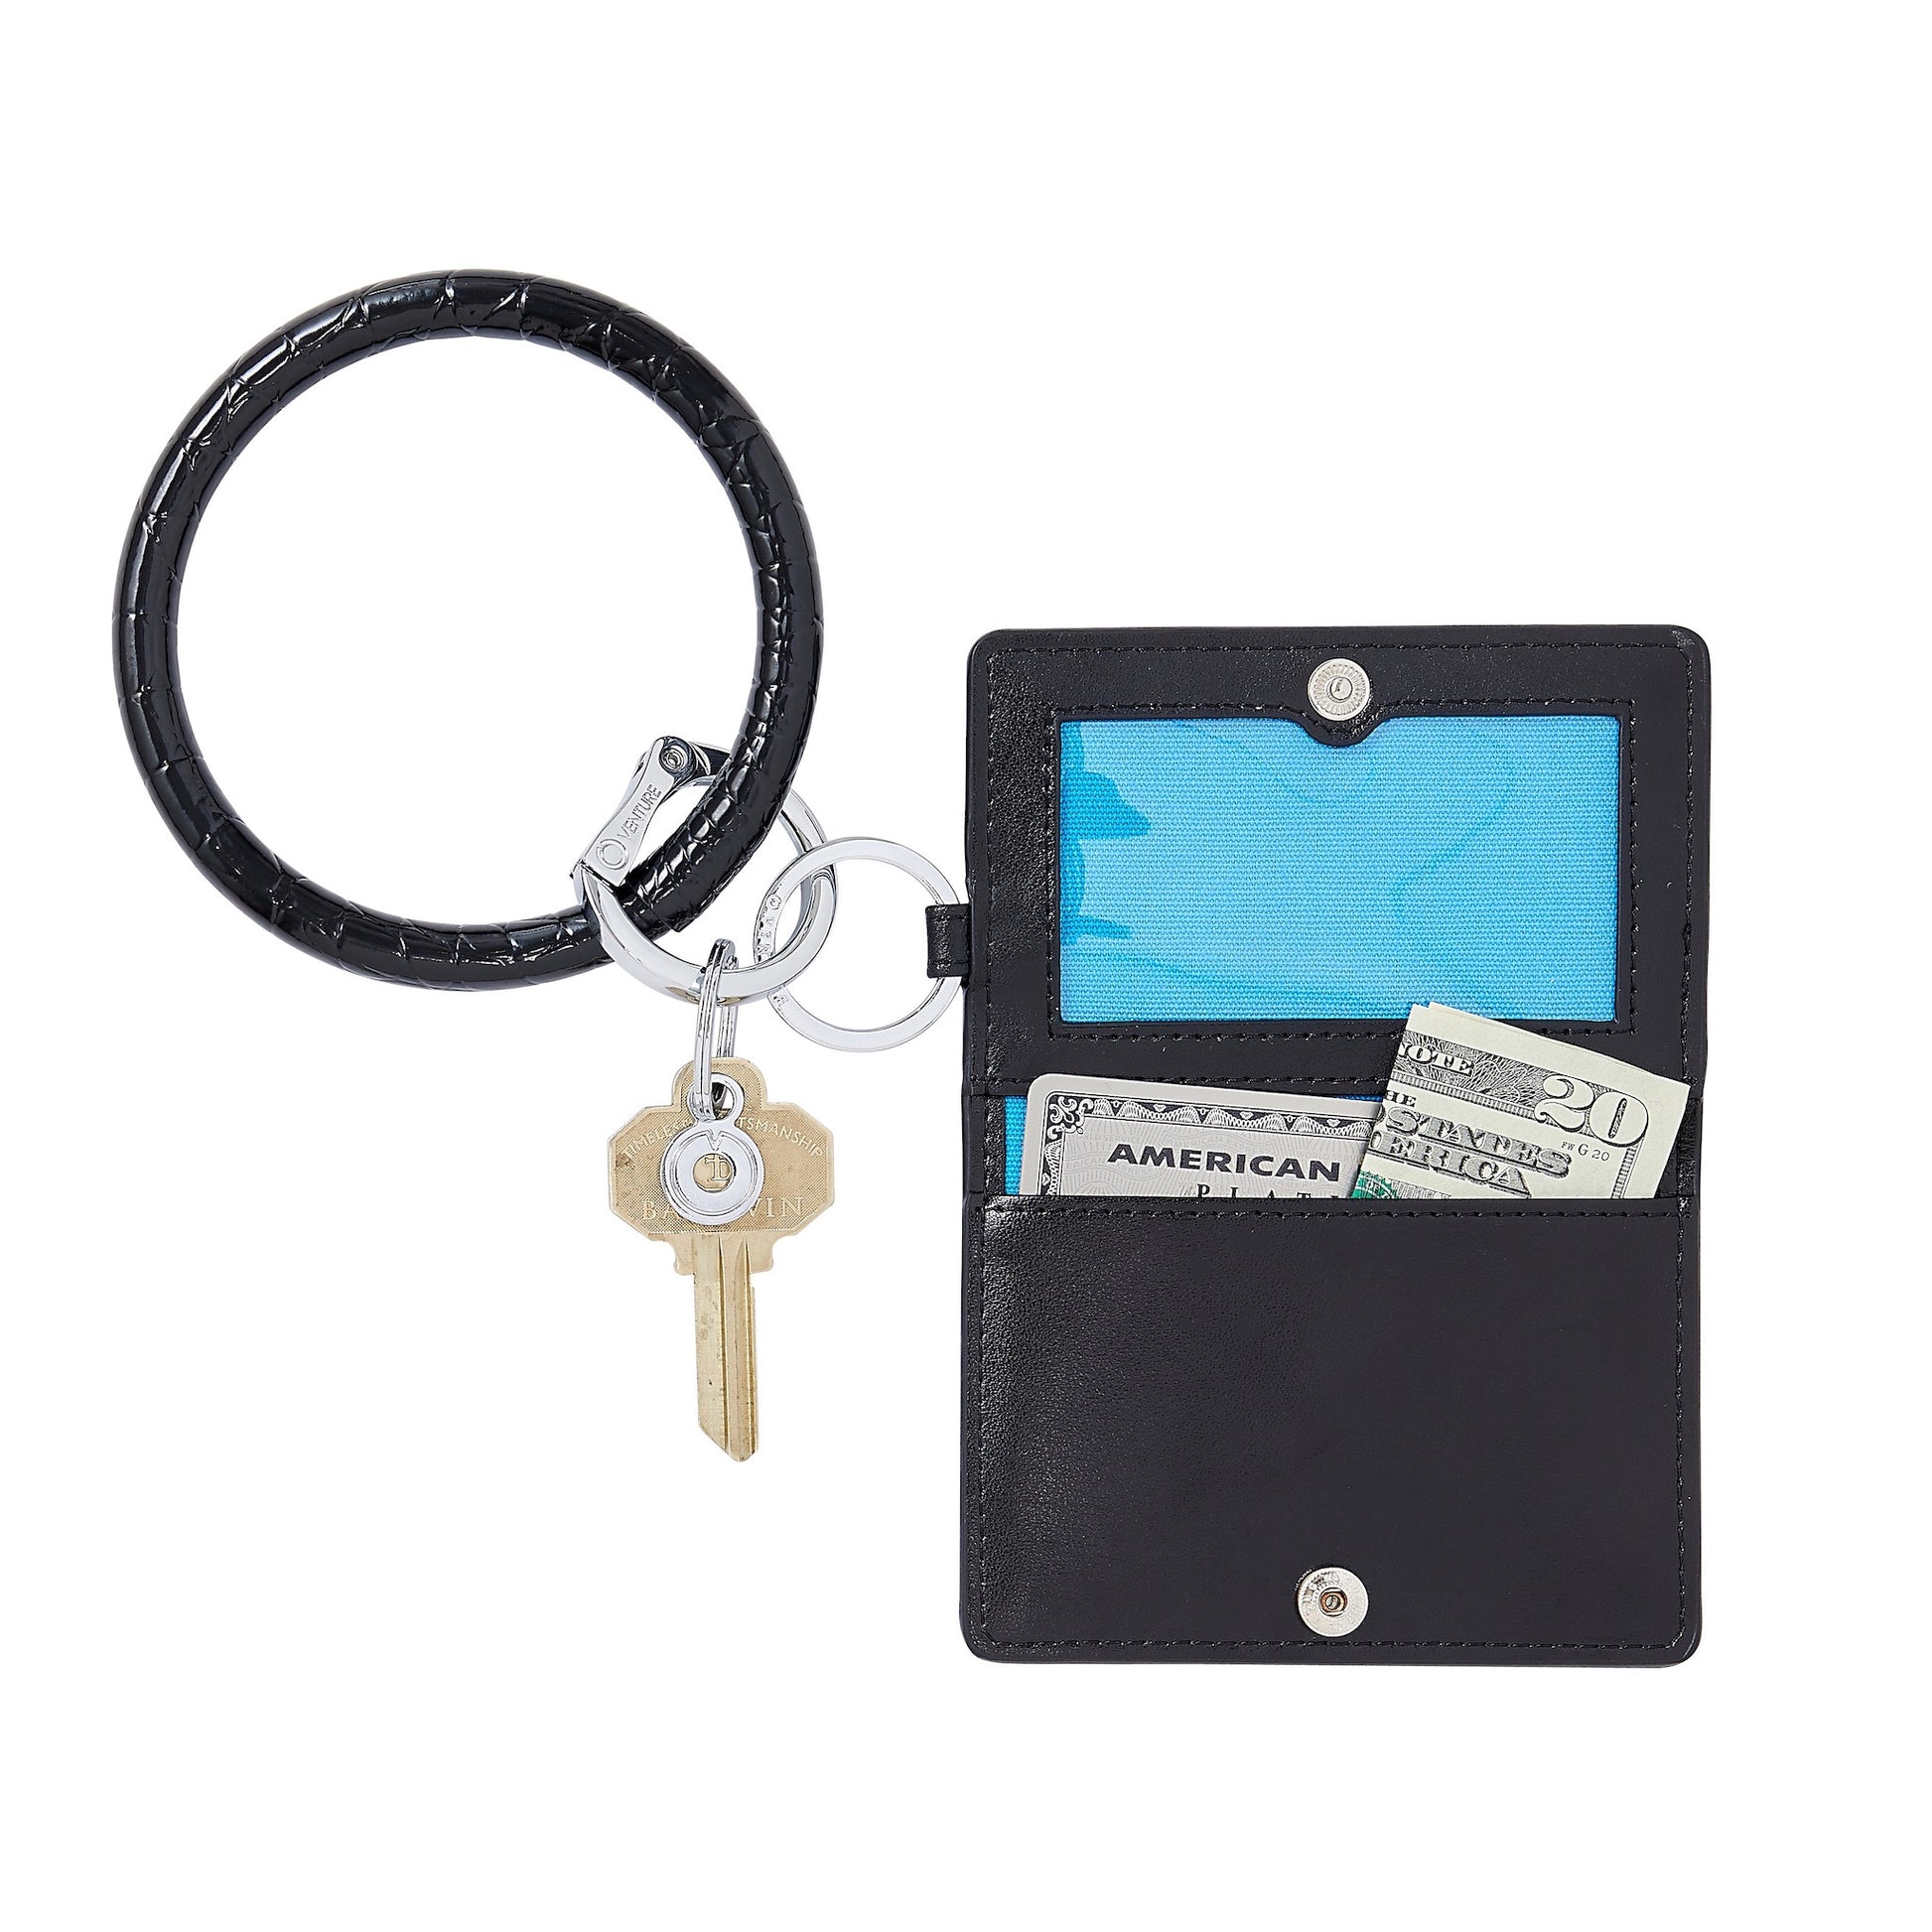 Oventure Wallets, Pouches, and Bracelet Bags